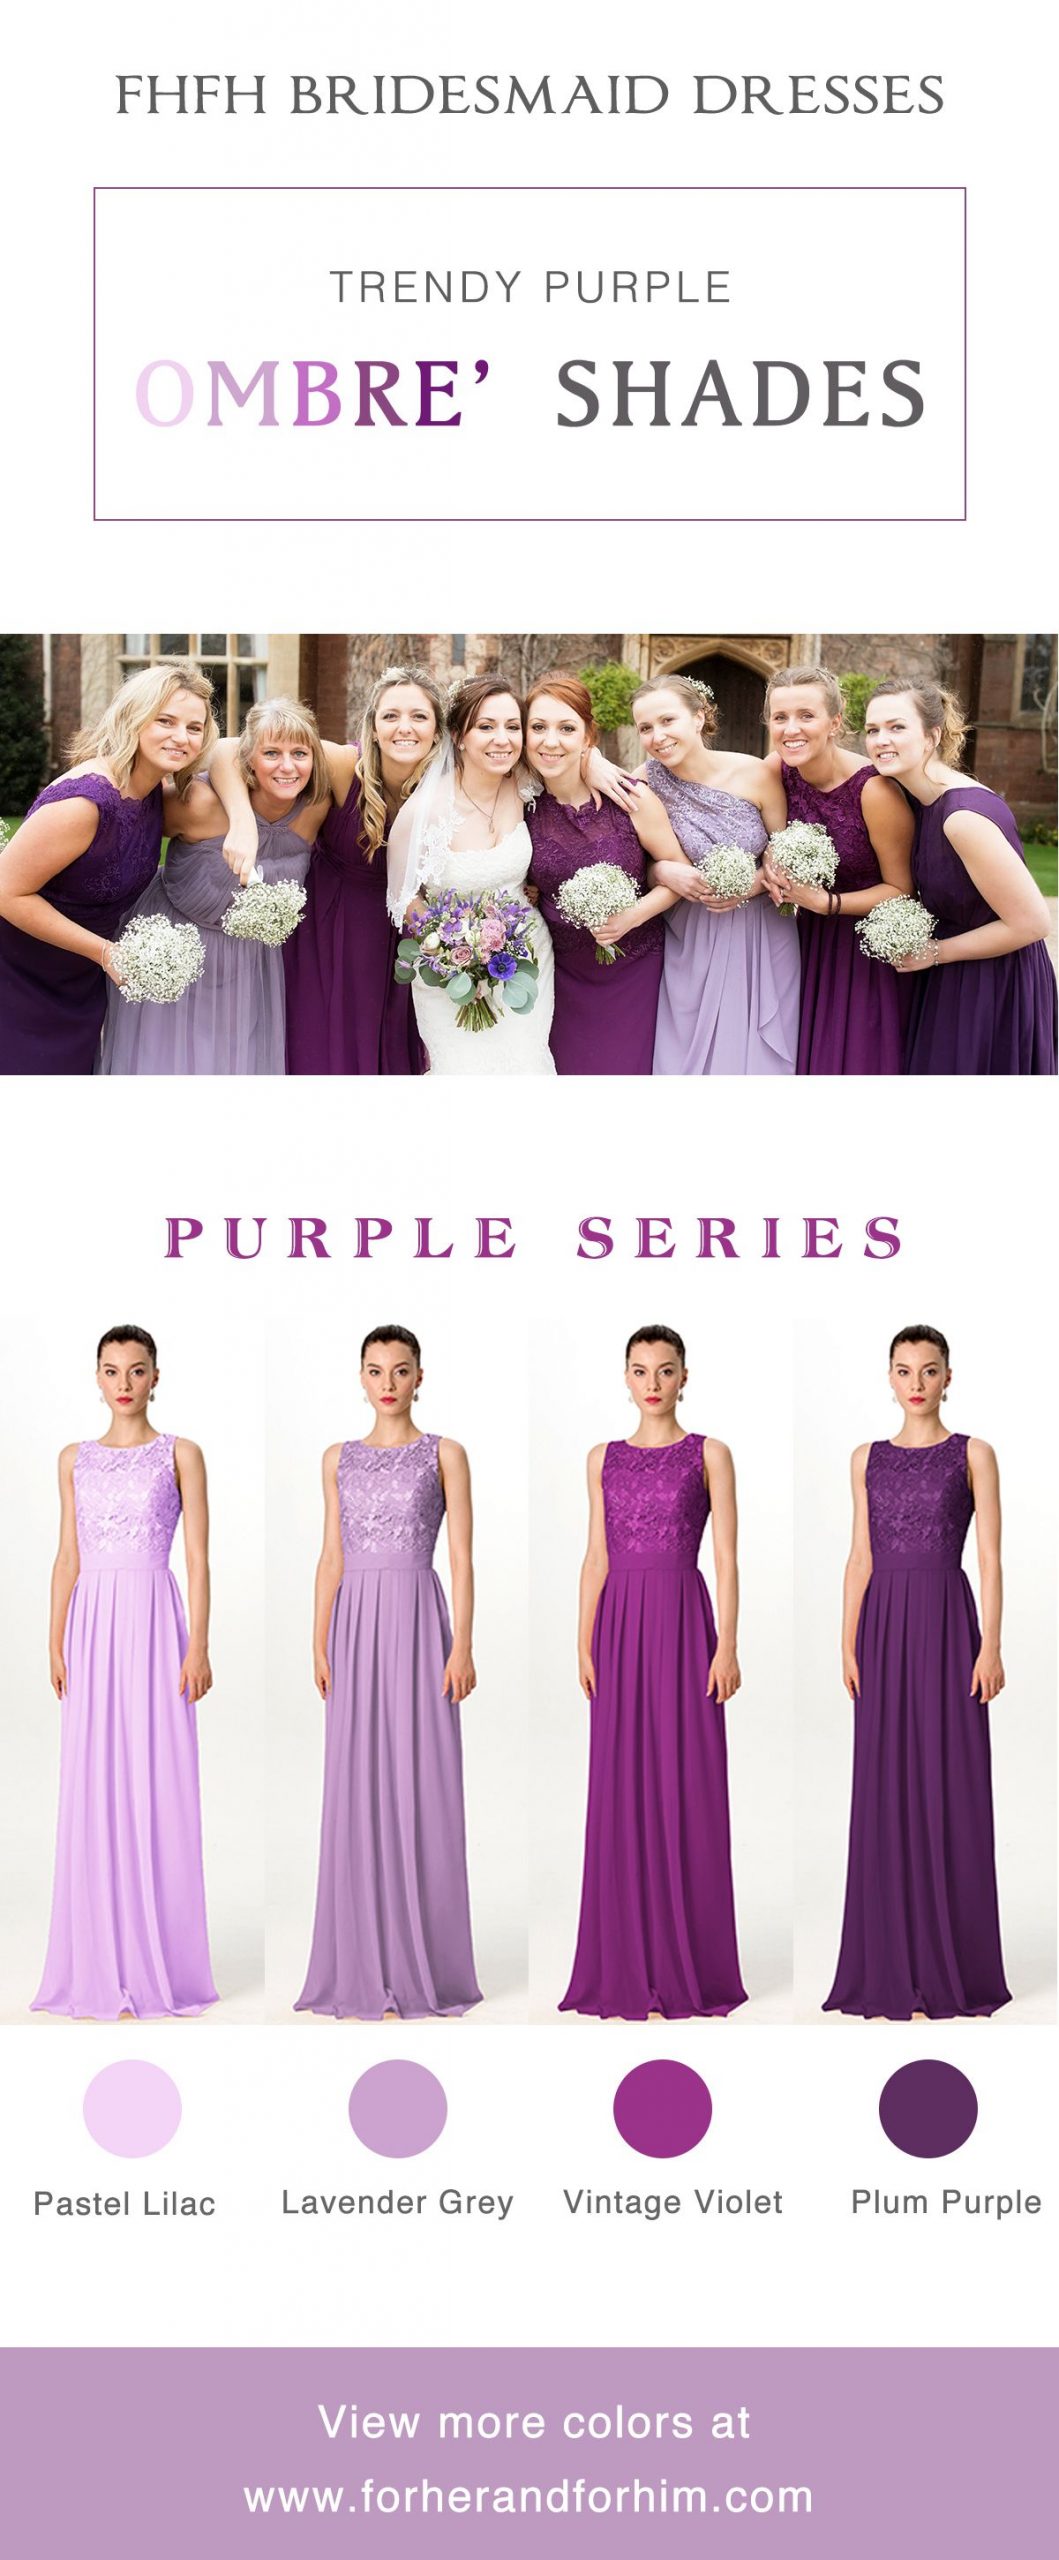 Amazing trendy purple bridesmaid dresses from FHFH! Huge spring sale is going on…